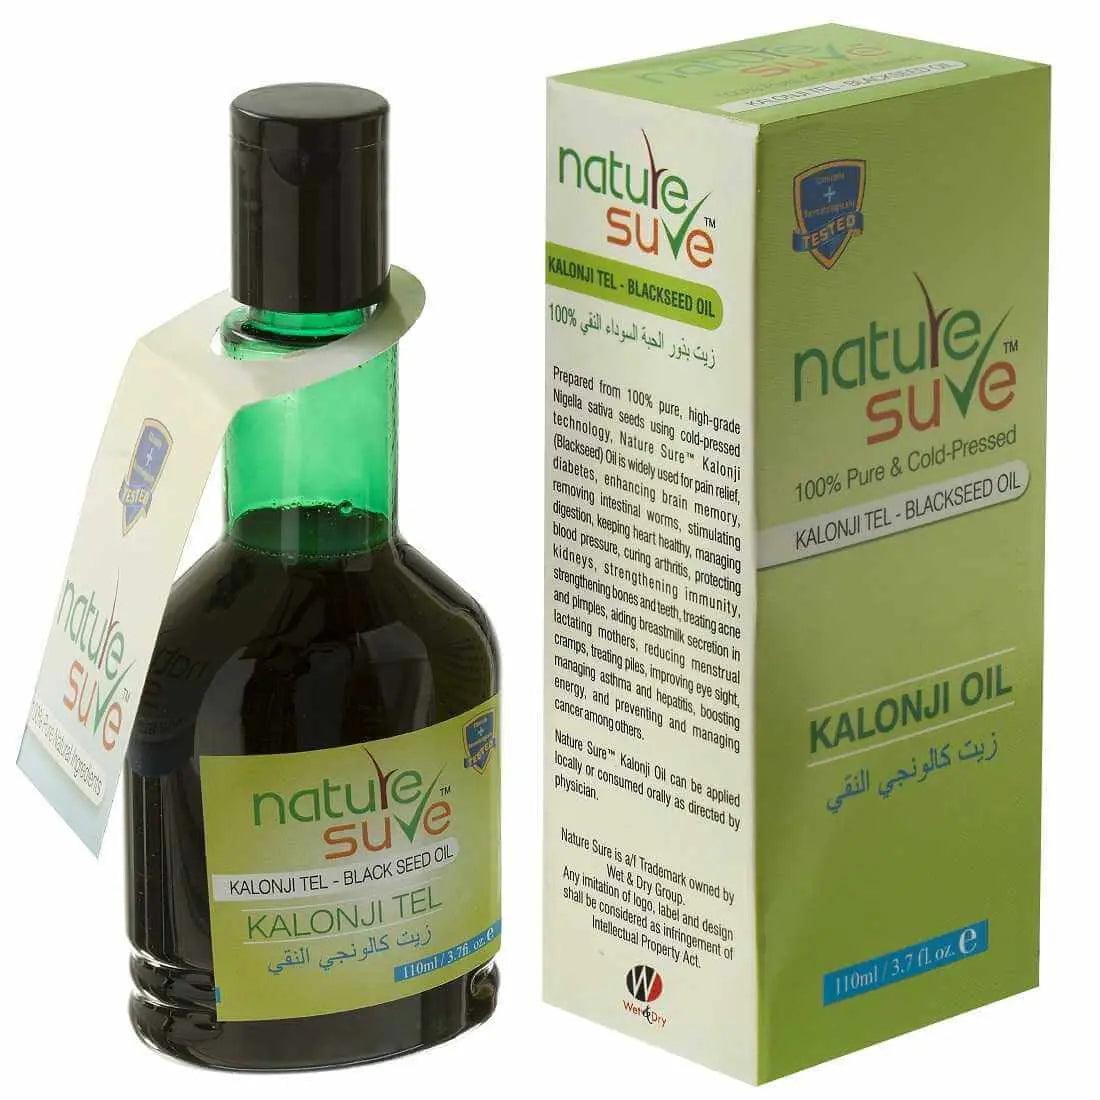 Nature Sure Kalonji Tail (Blackseed Oil) - 100% Pure and Cold-Pressed - 110ml 8908003648804